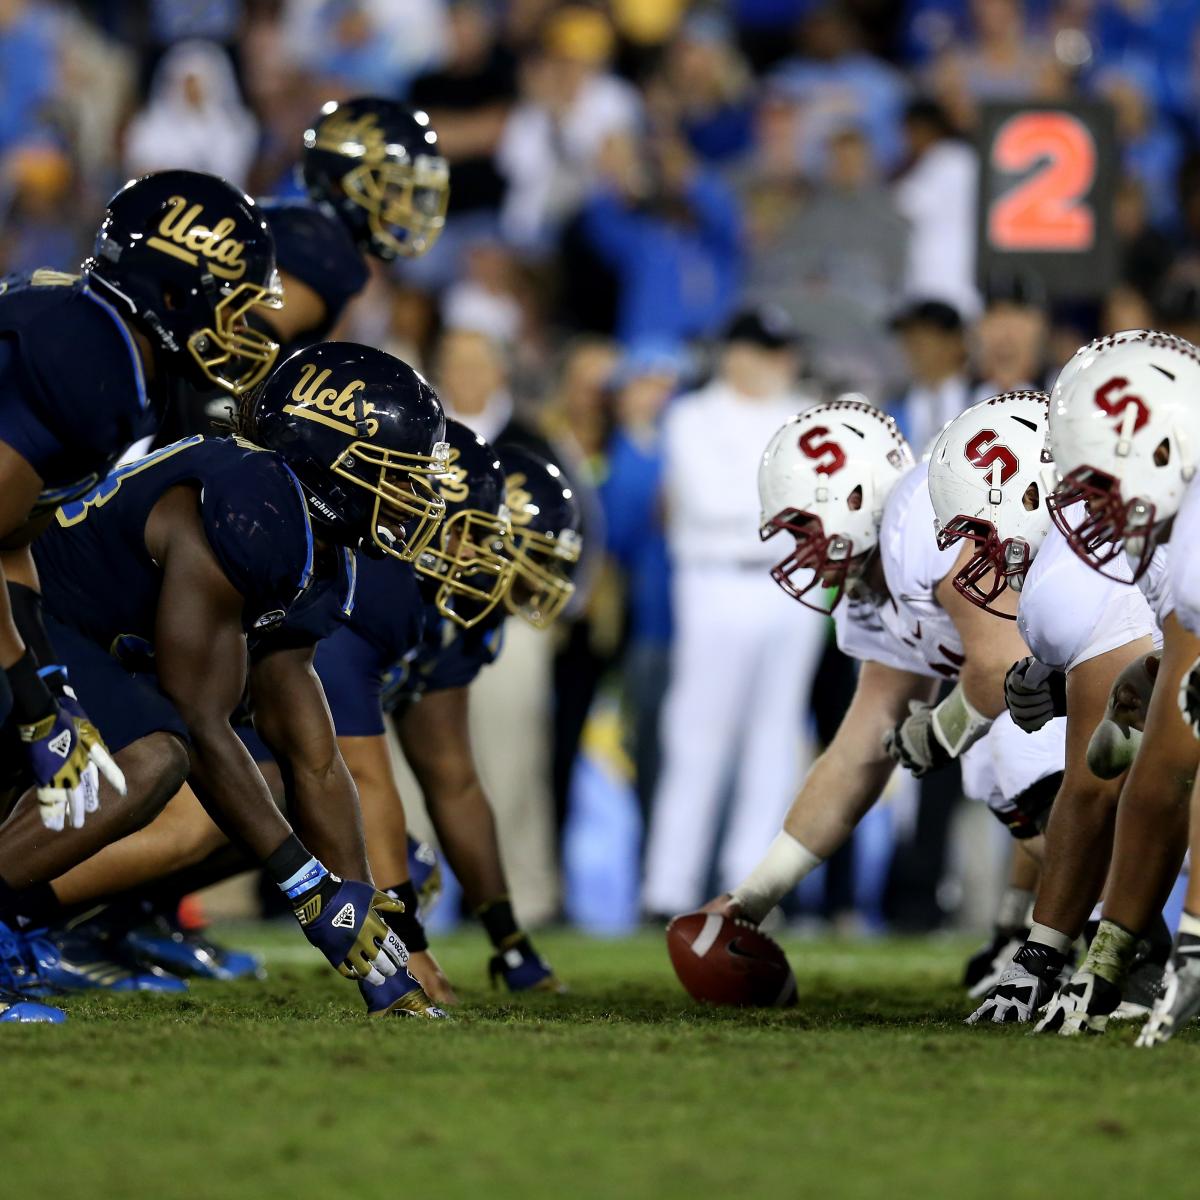 UCLA vs. Stanford: TV Schedule, Live Stream, Radio, Game Time and More